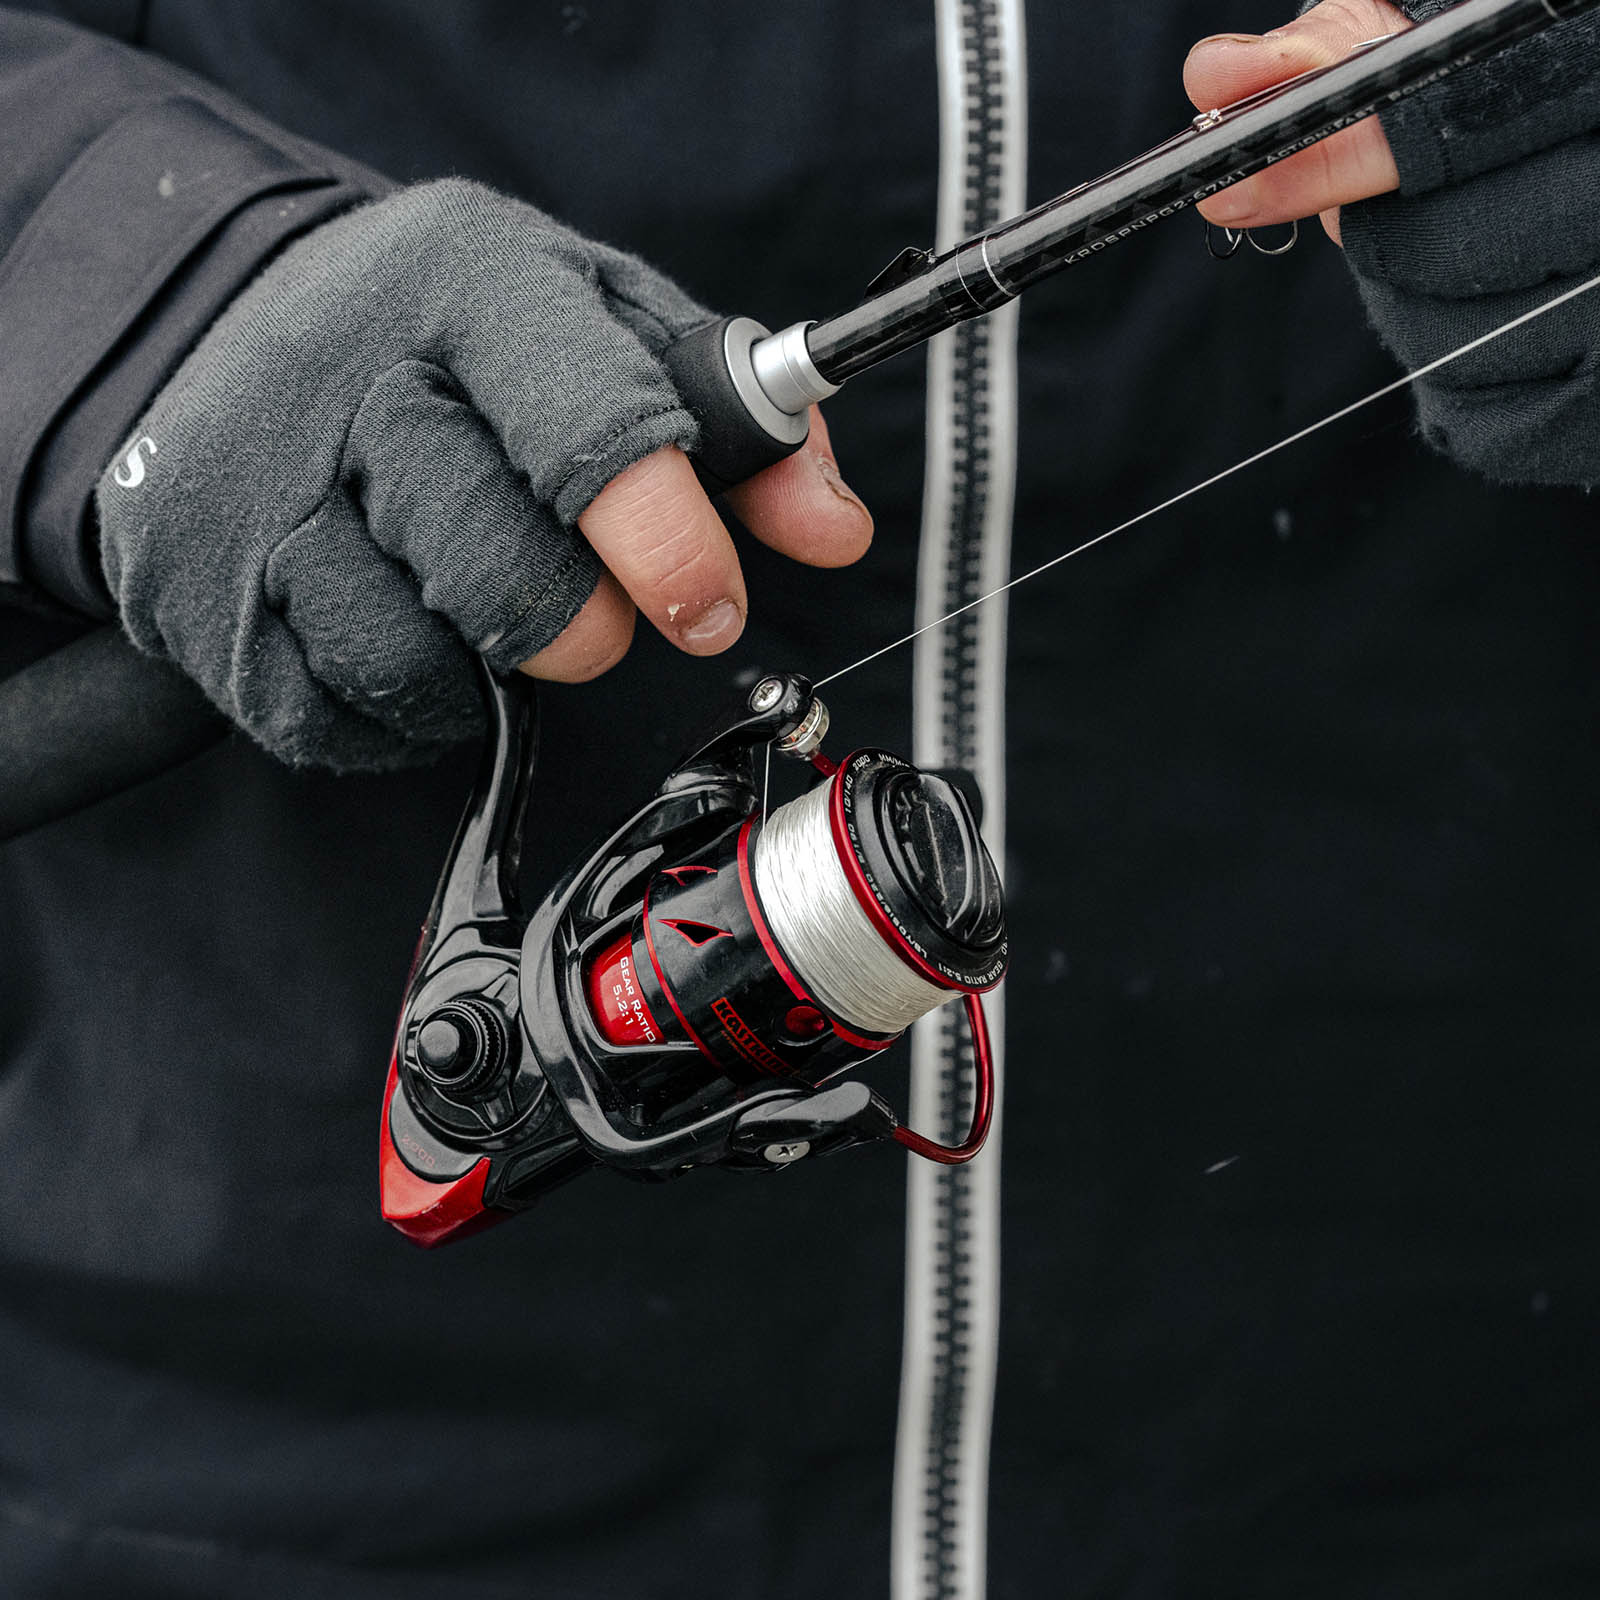 KastKing Sharky Baitfeeder III Spinning Fishing Reel,Size 6000 : Buy Online  at Best Price in KSA - Souq is now : Sporting Goods